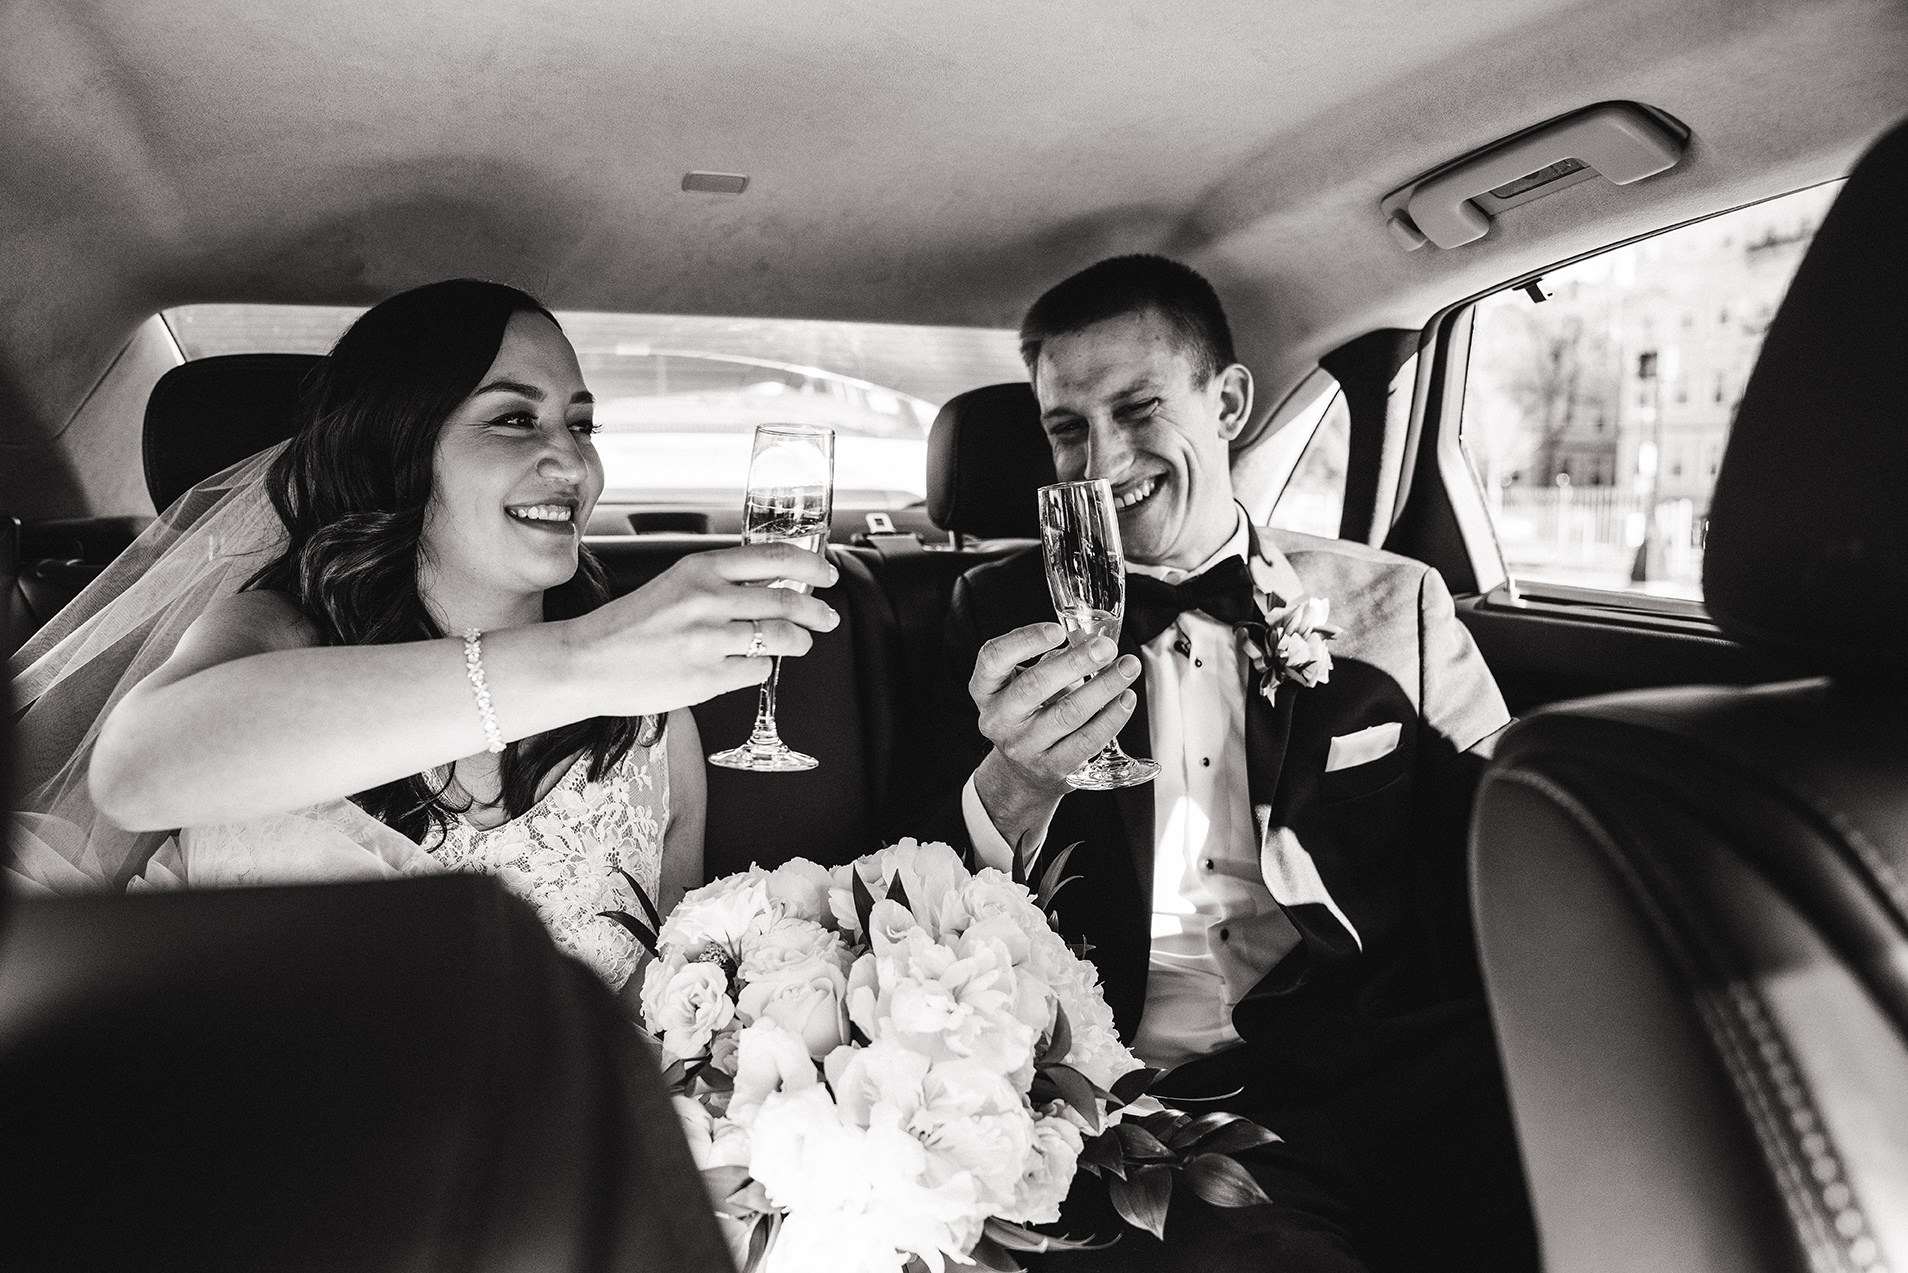 A documentary photograph of the bride and groom in the car together when just married at marsh chapel in Boston